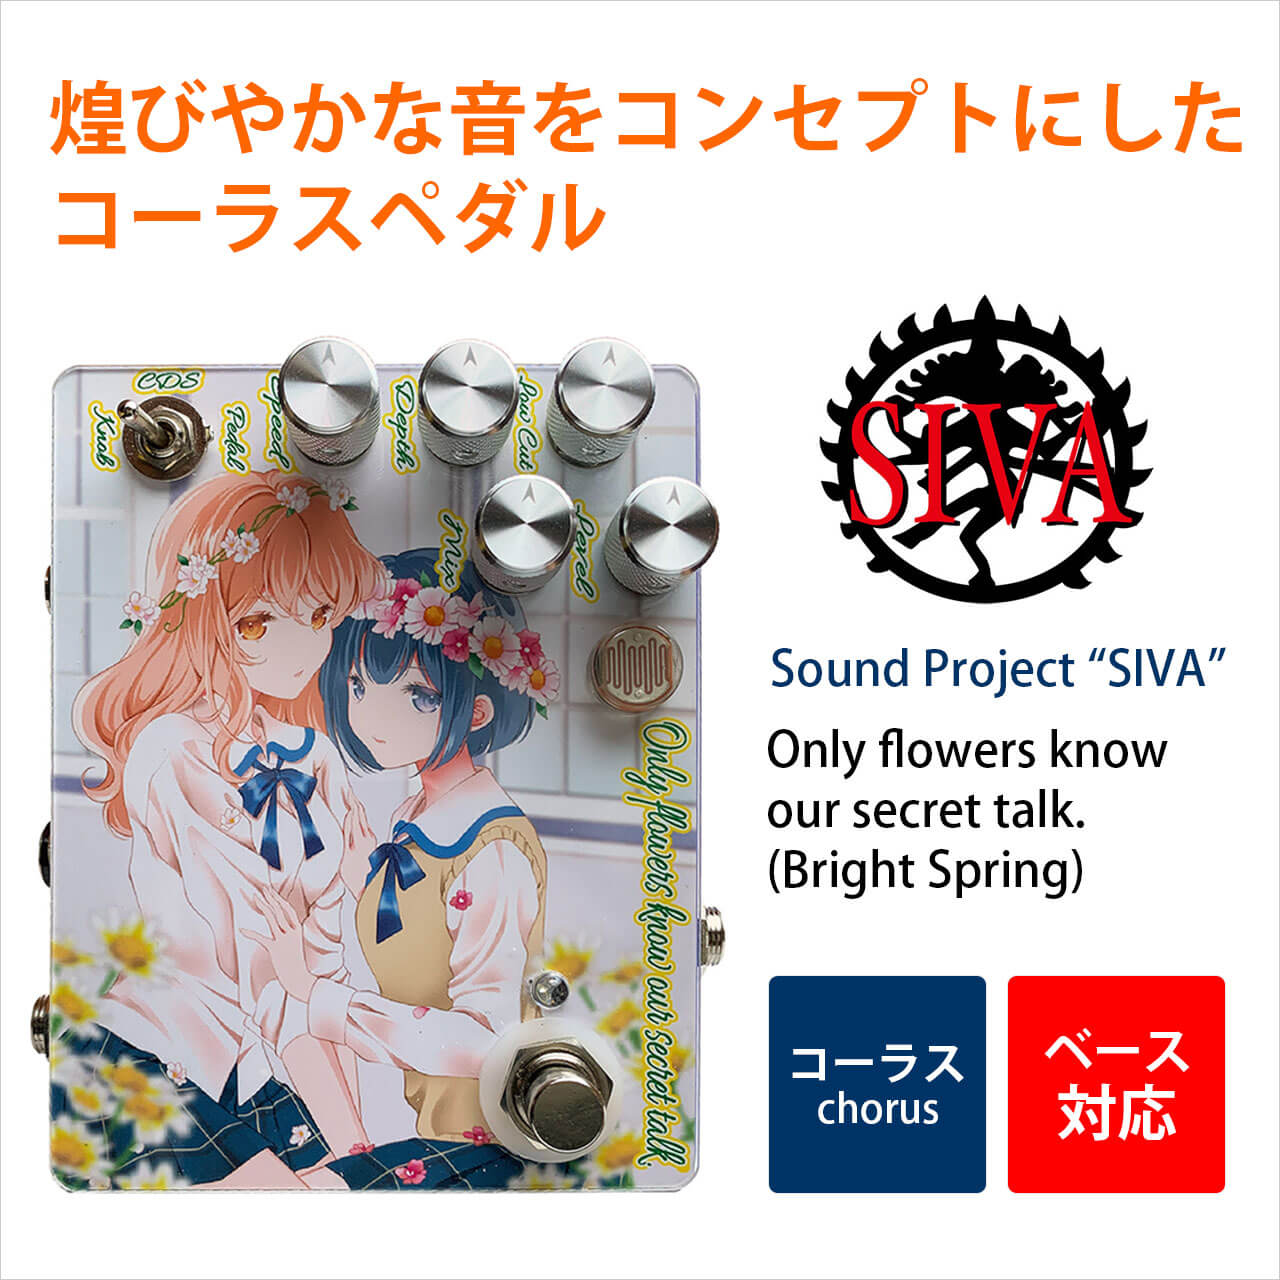 Sound Project “SIVA” サウンドプロジェクトシヴァ / Only flowers know our secret talk.（Bright Spring）【コーラス】